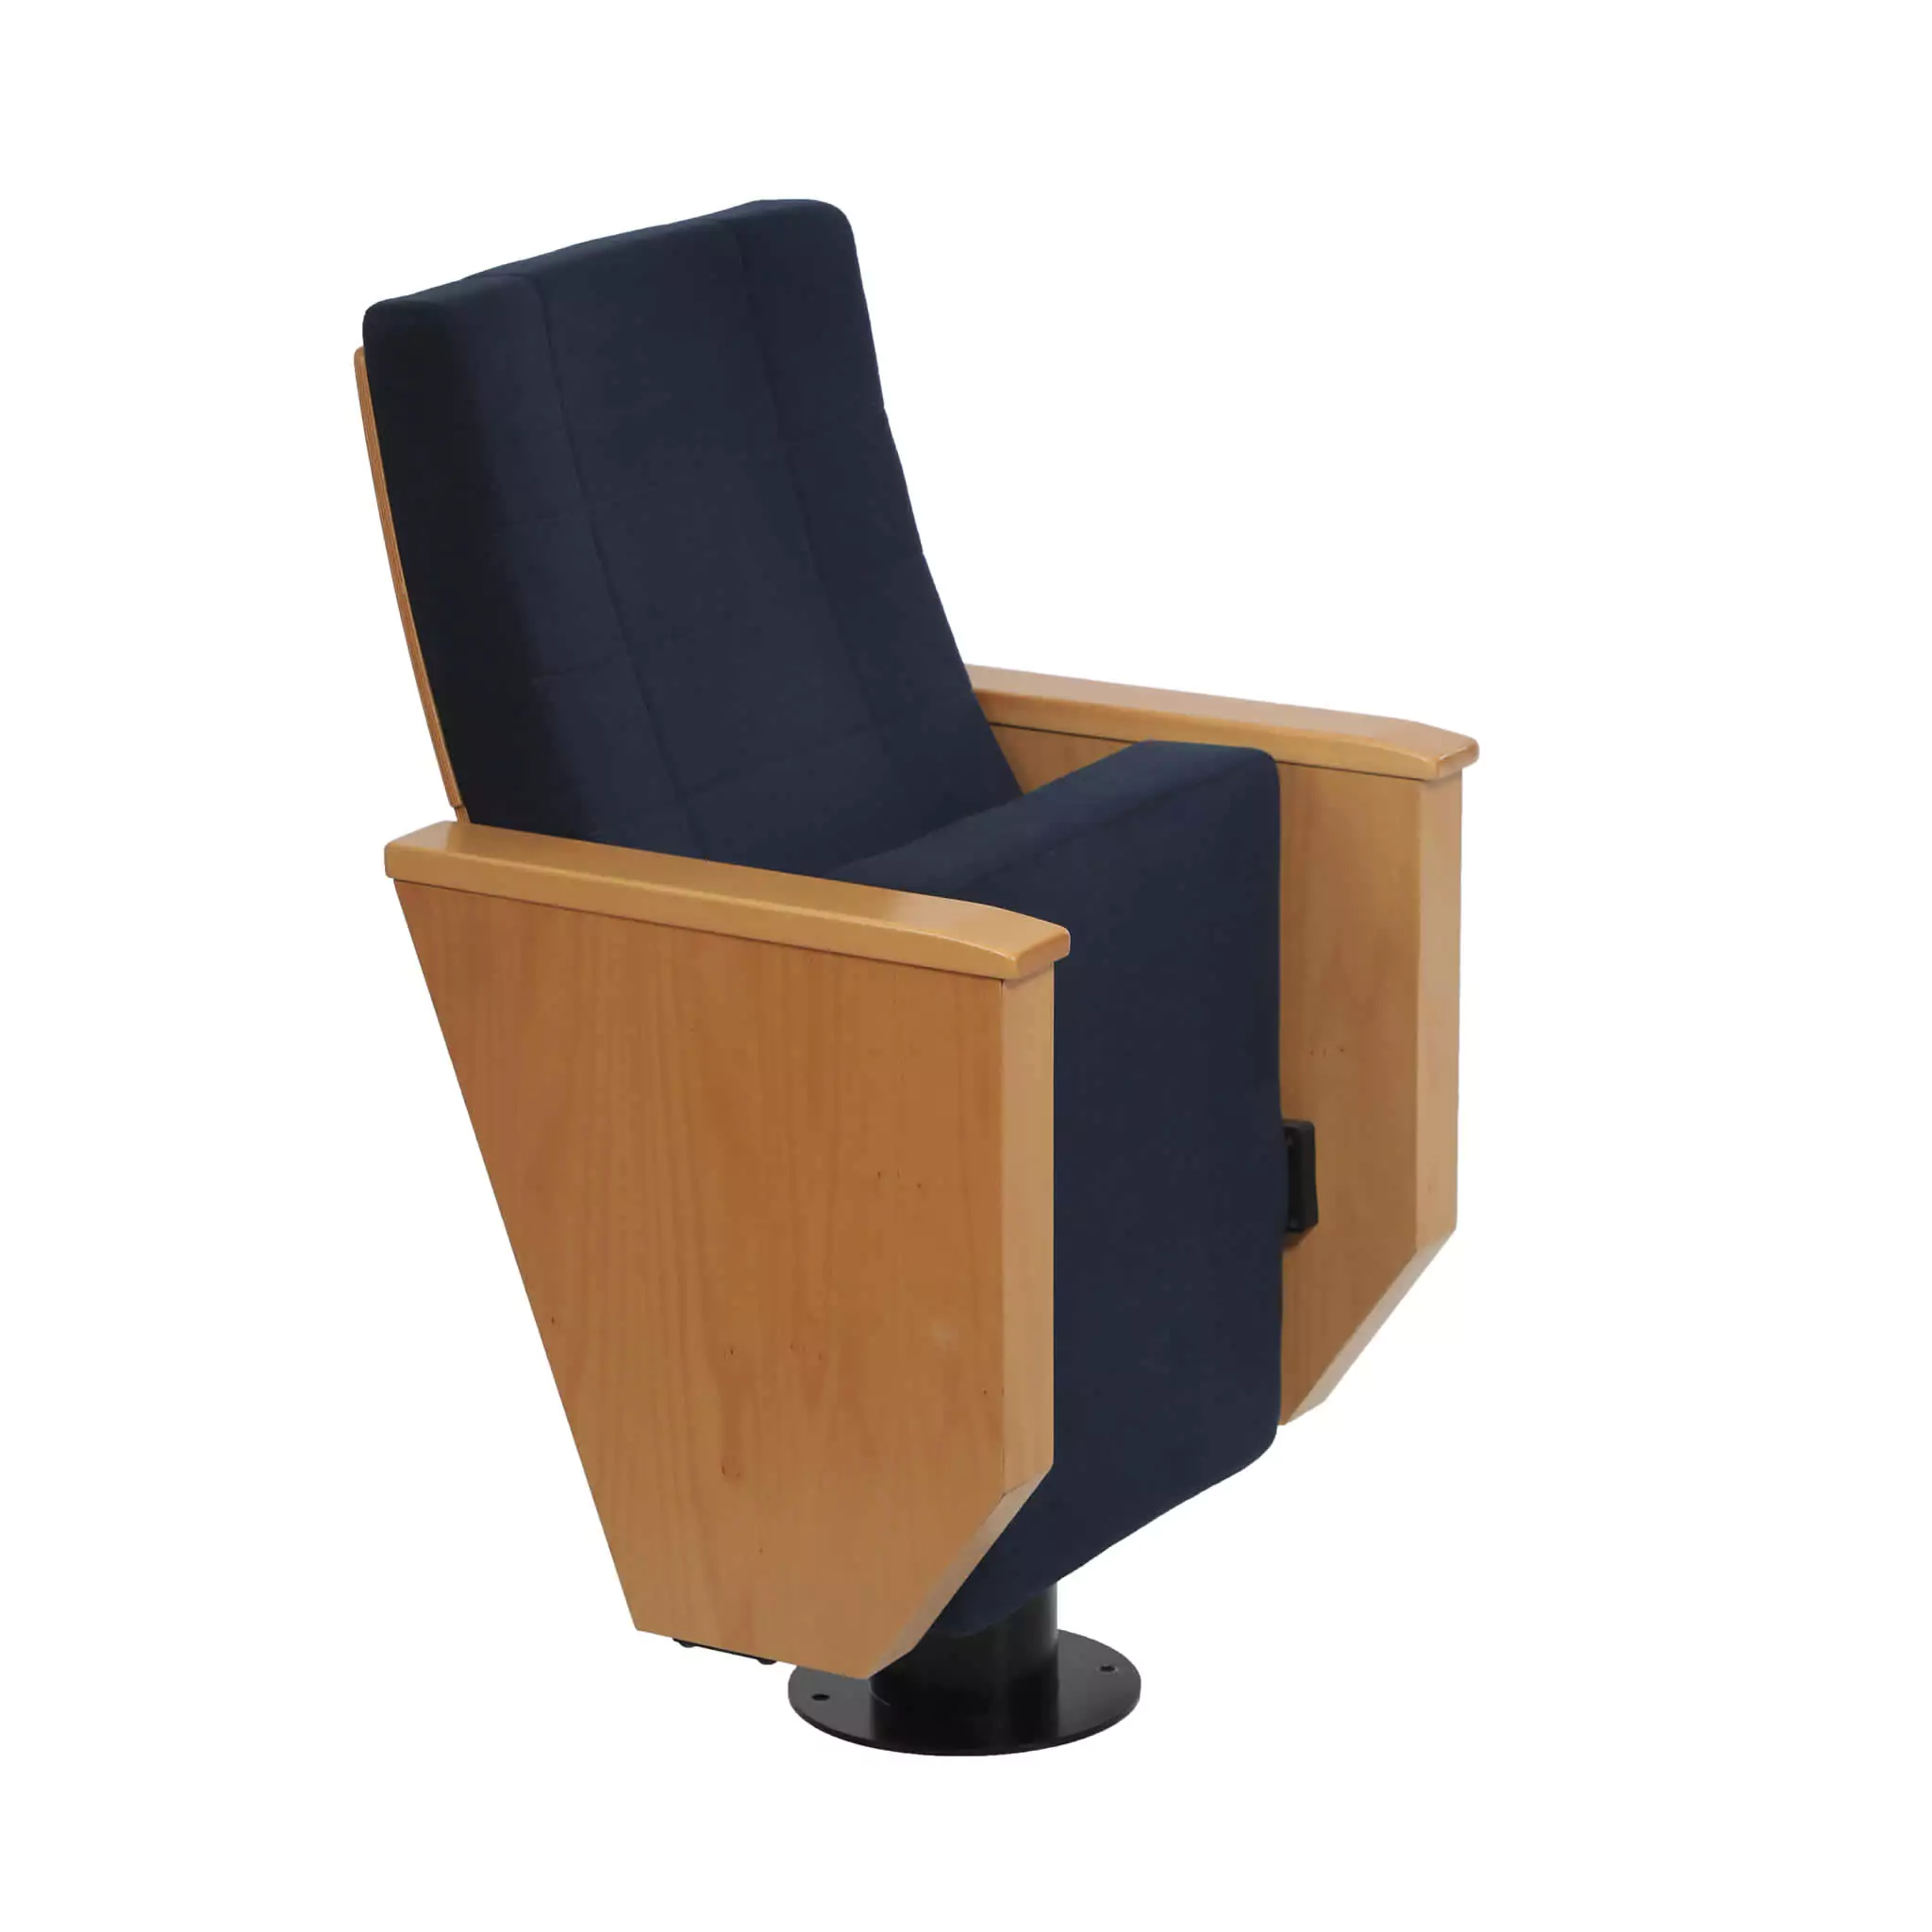 Simko Seating Product Conference Seat Safir ST 04